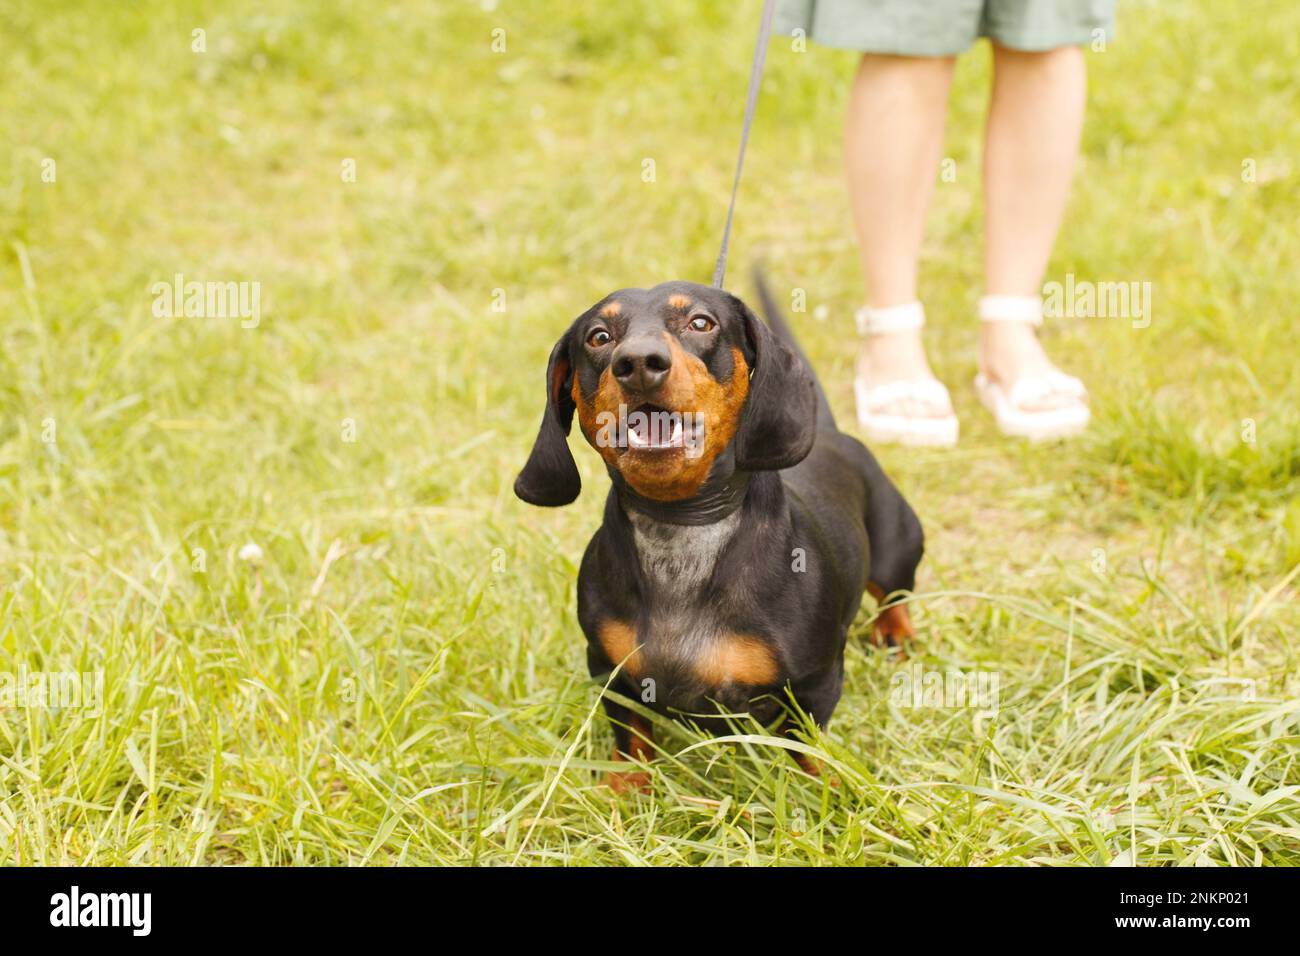 woman walks with the dog on a leash in the park . dachshund are barking near a woman's feet. Stock Photo